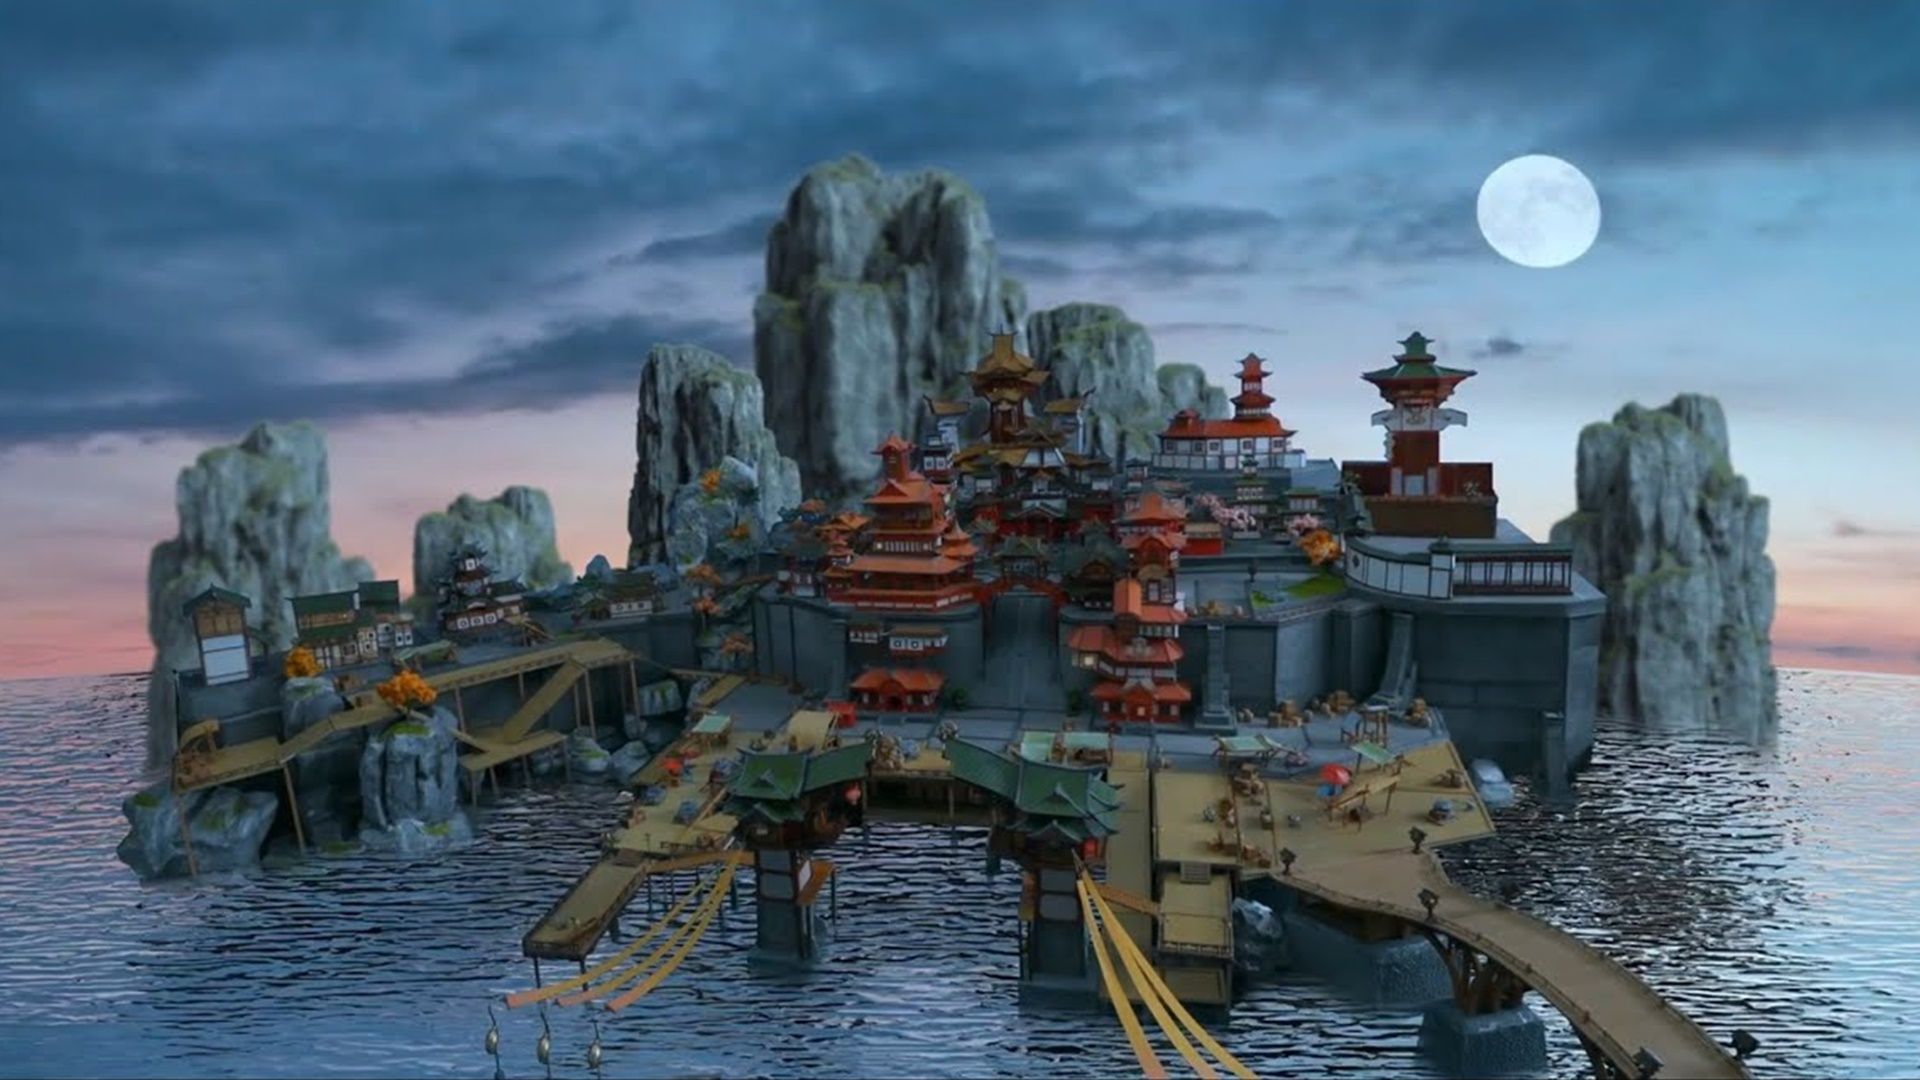 Genshin Impact Fans Spend 1000 Hours Building A Real Life Model Of Liyue Harbor